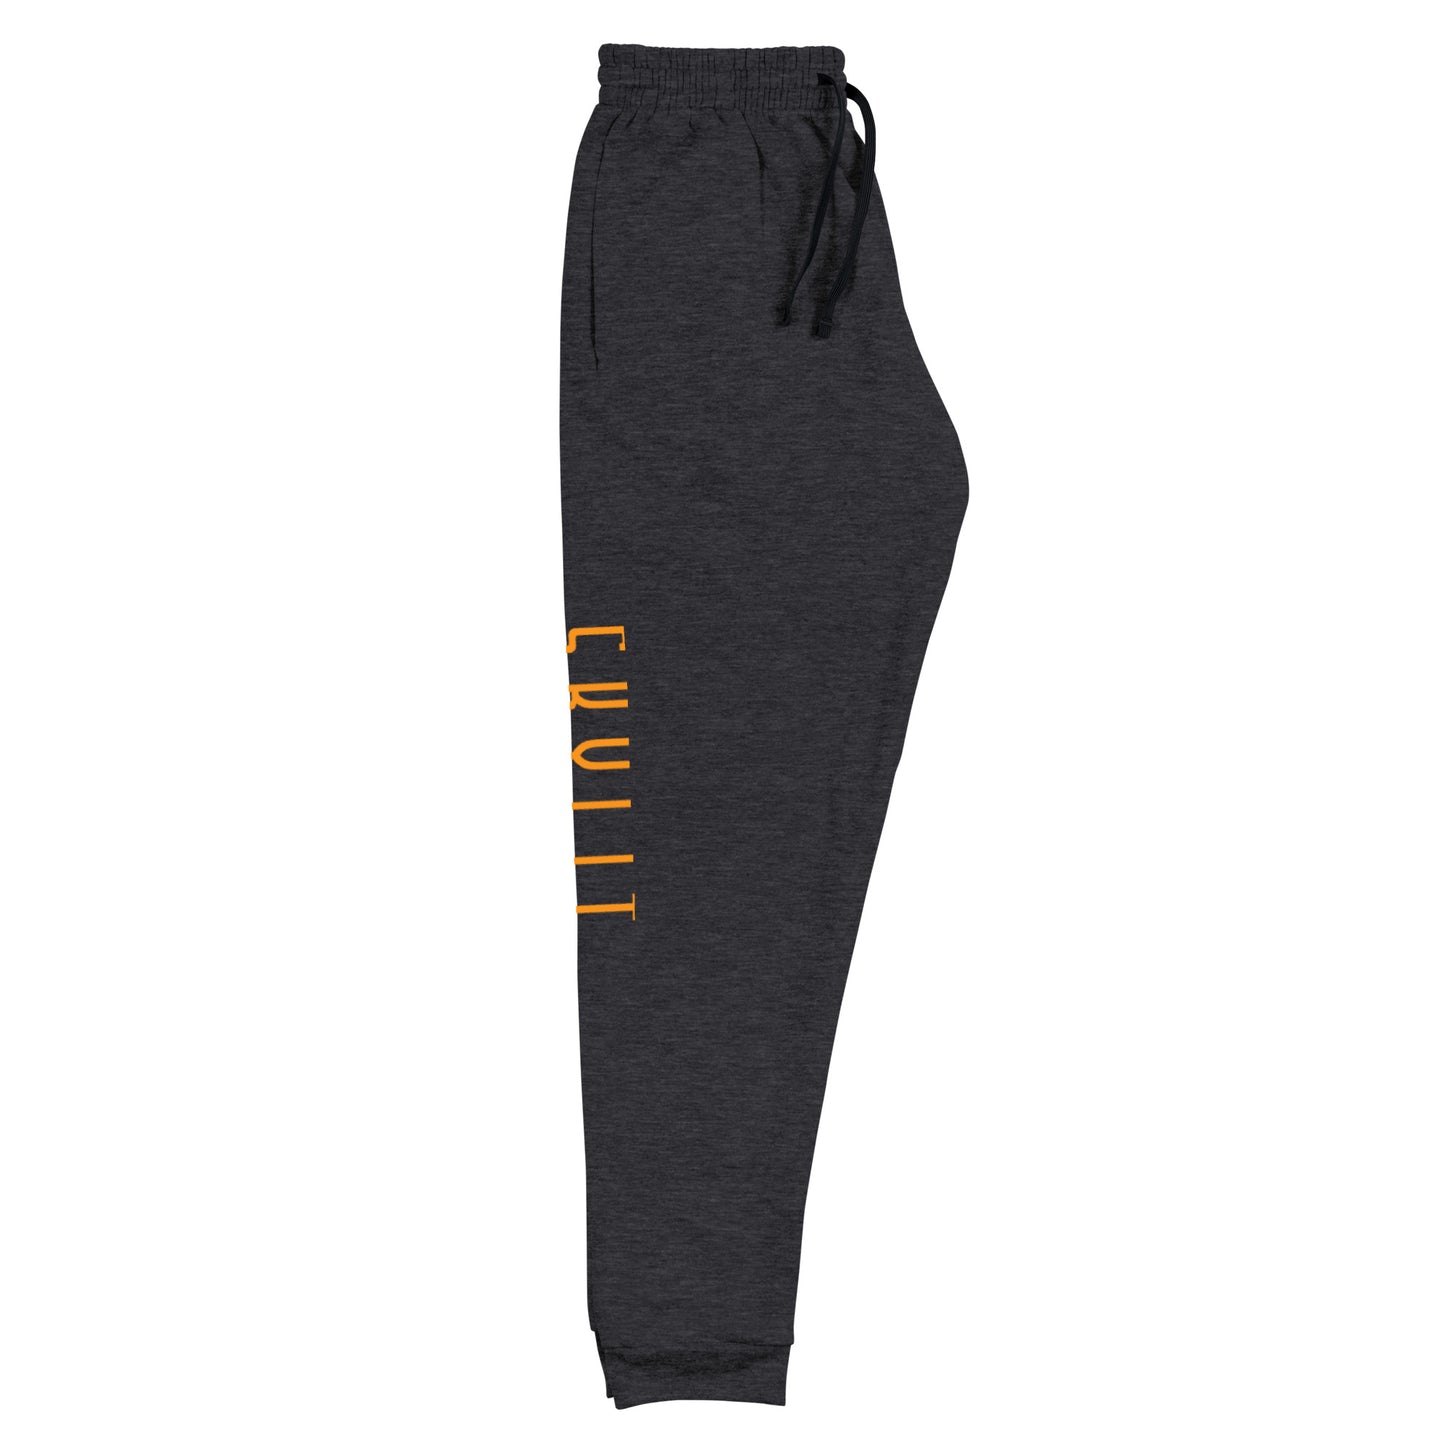 Trapper's Delight 8ths Joggers